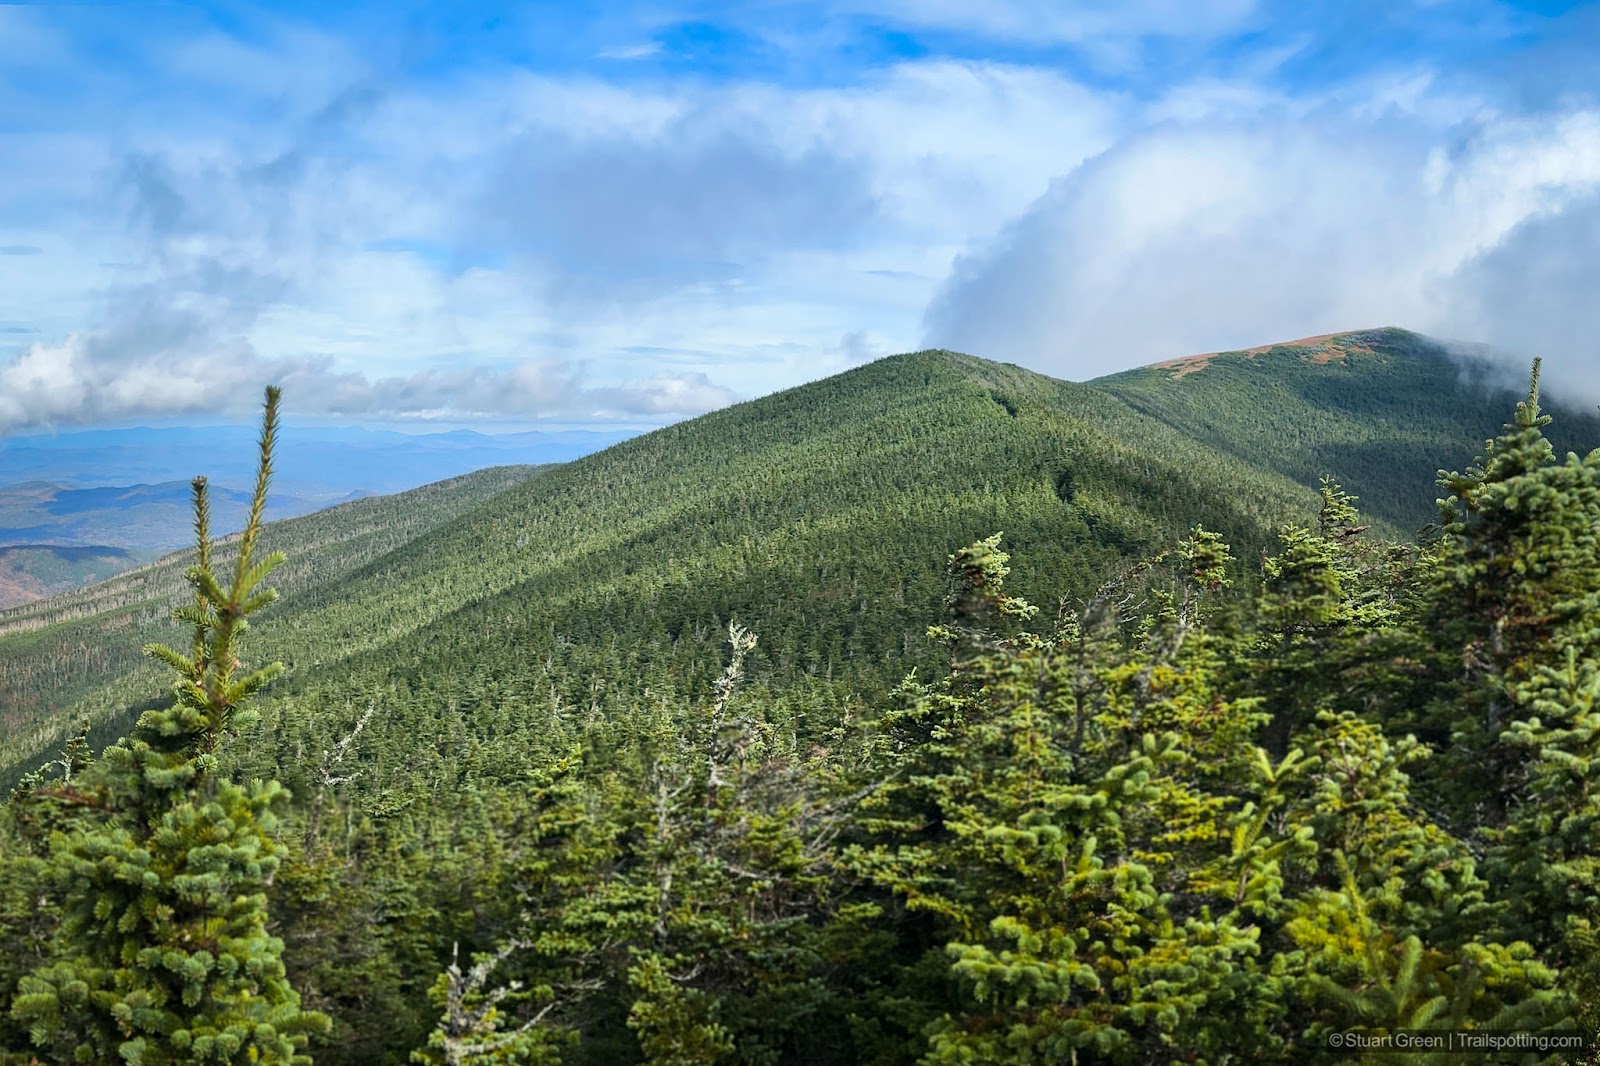 Mountain ridgeline carpeted with green trees. Moosilauke summit visible, and with bare orange grass close to the summit.